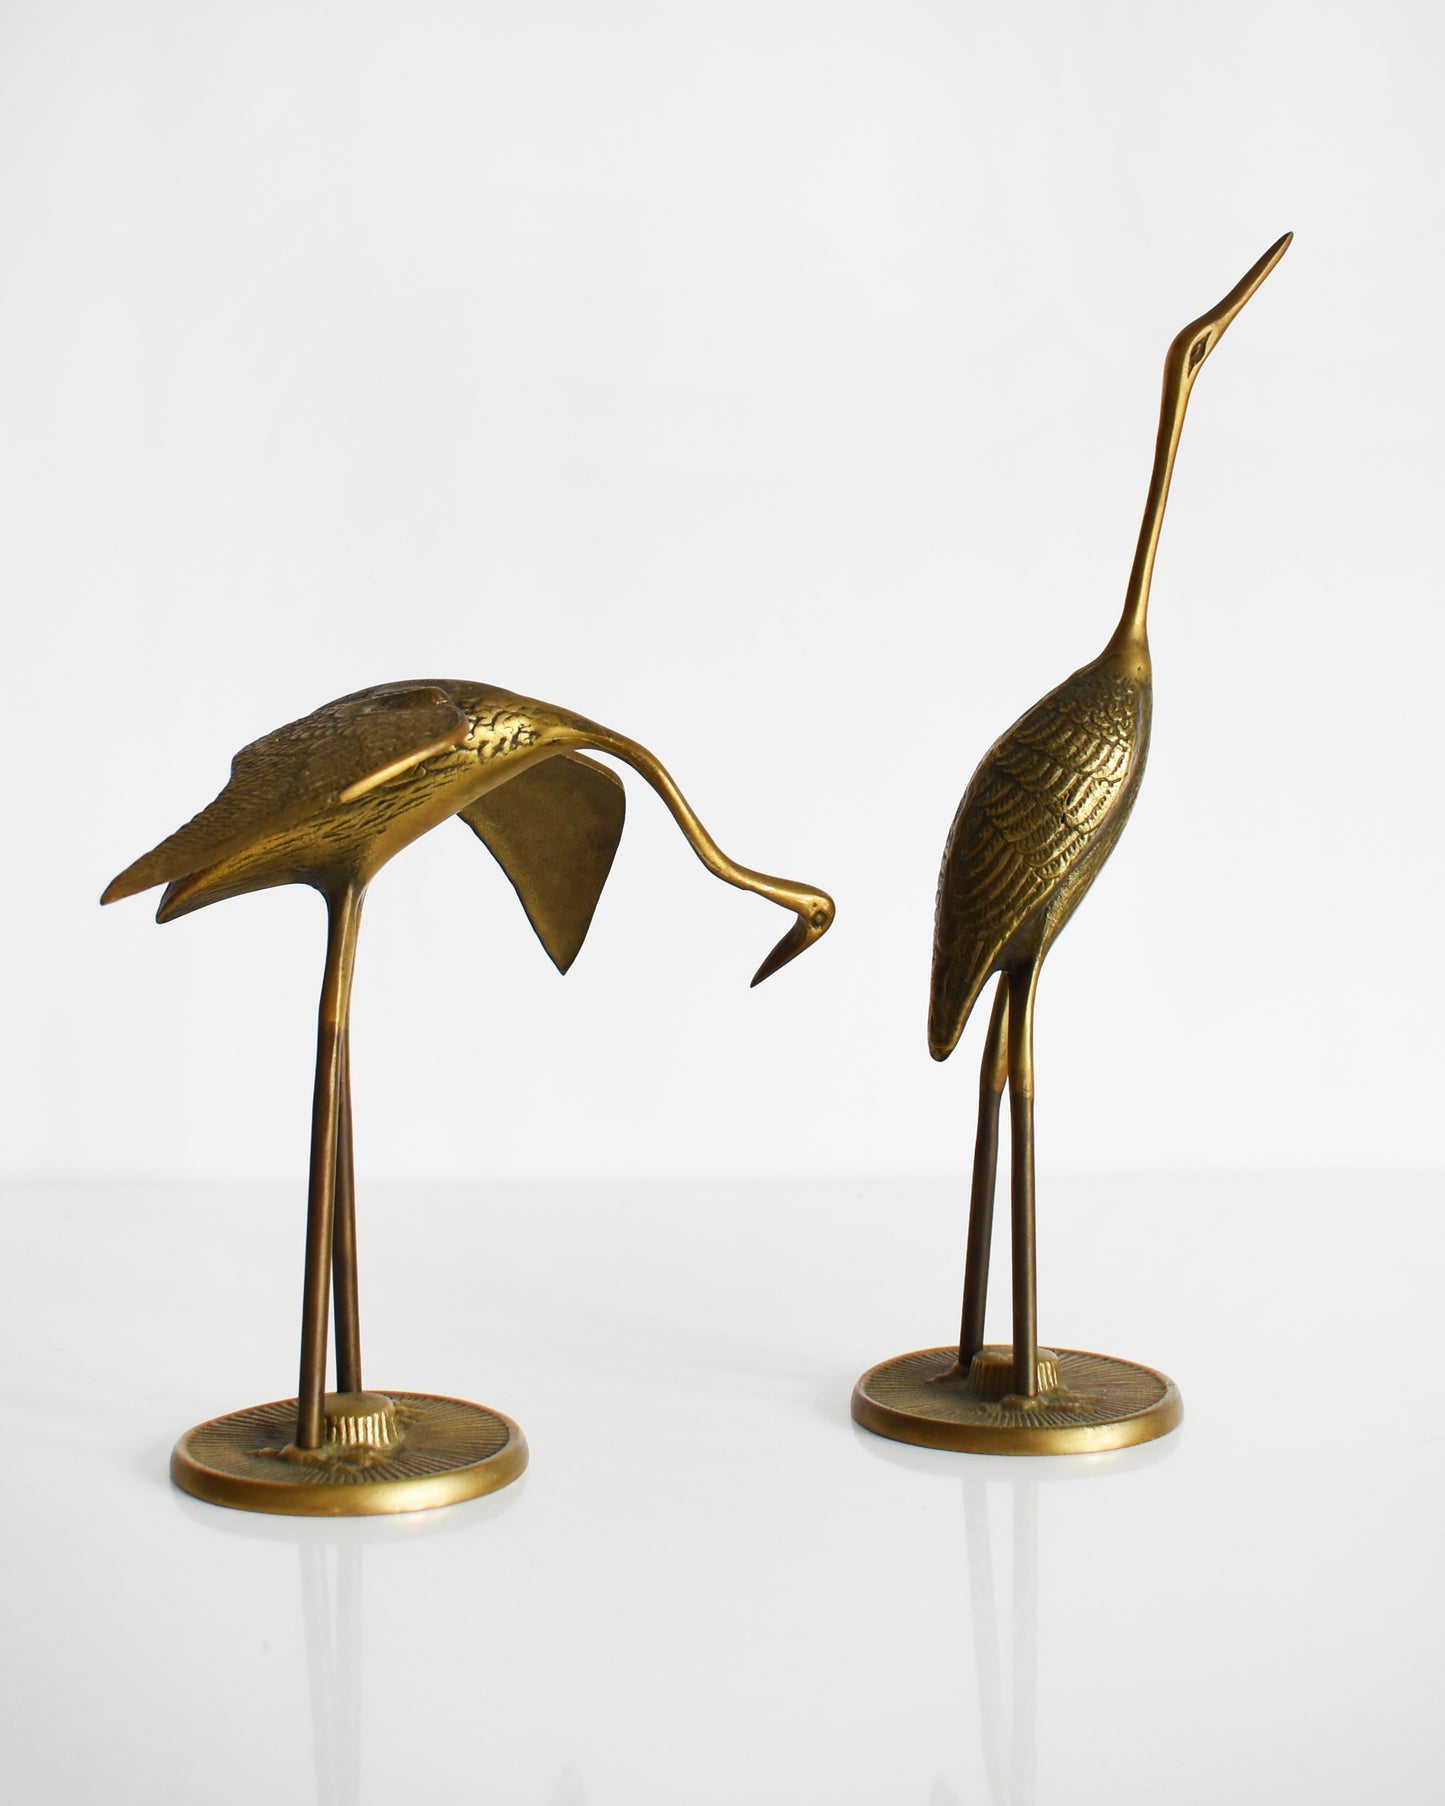 Side view of a pair of vintage brass cranes that have ornate carved detail on their wings and body.